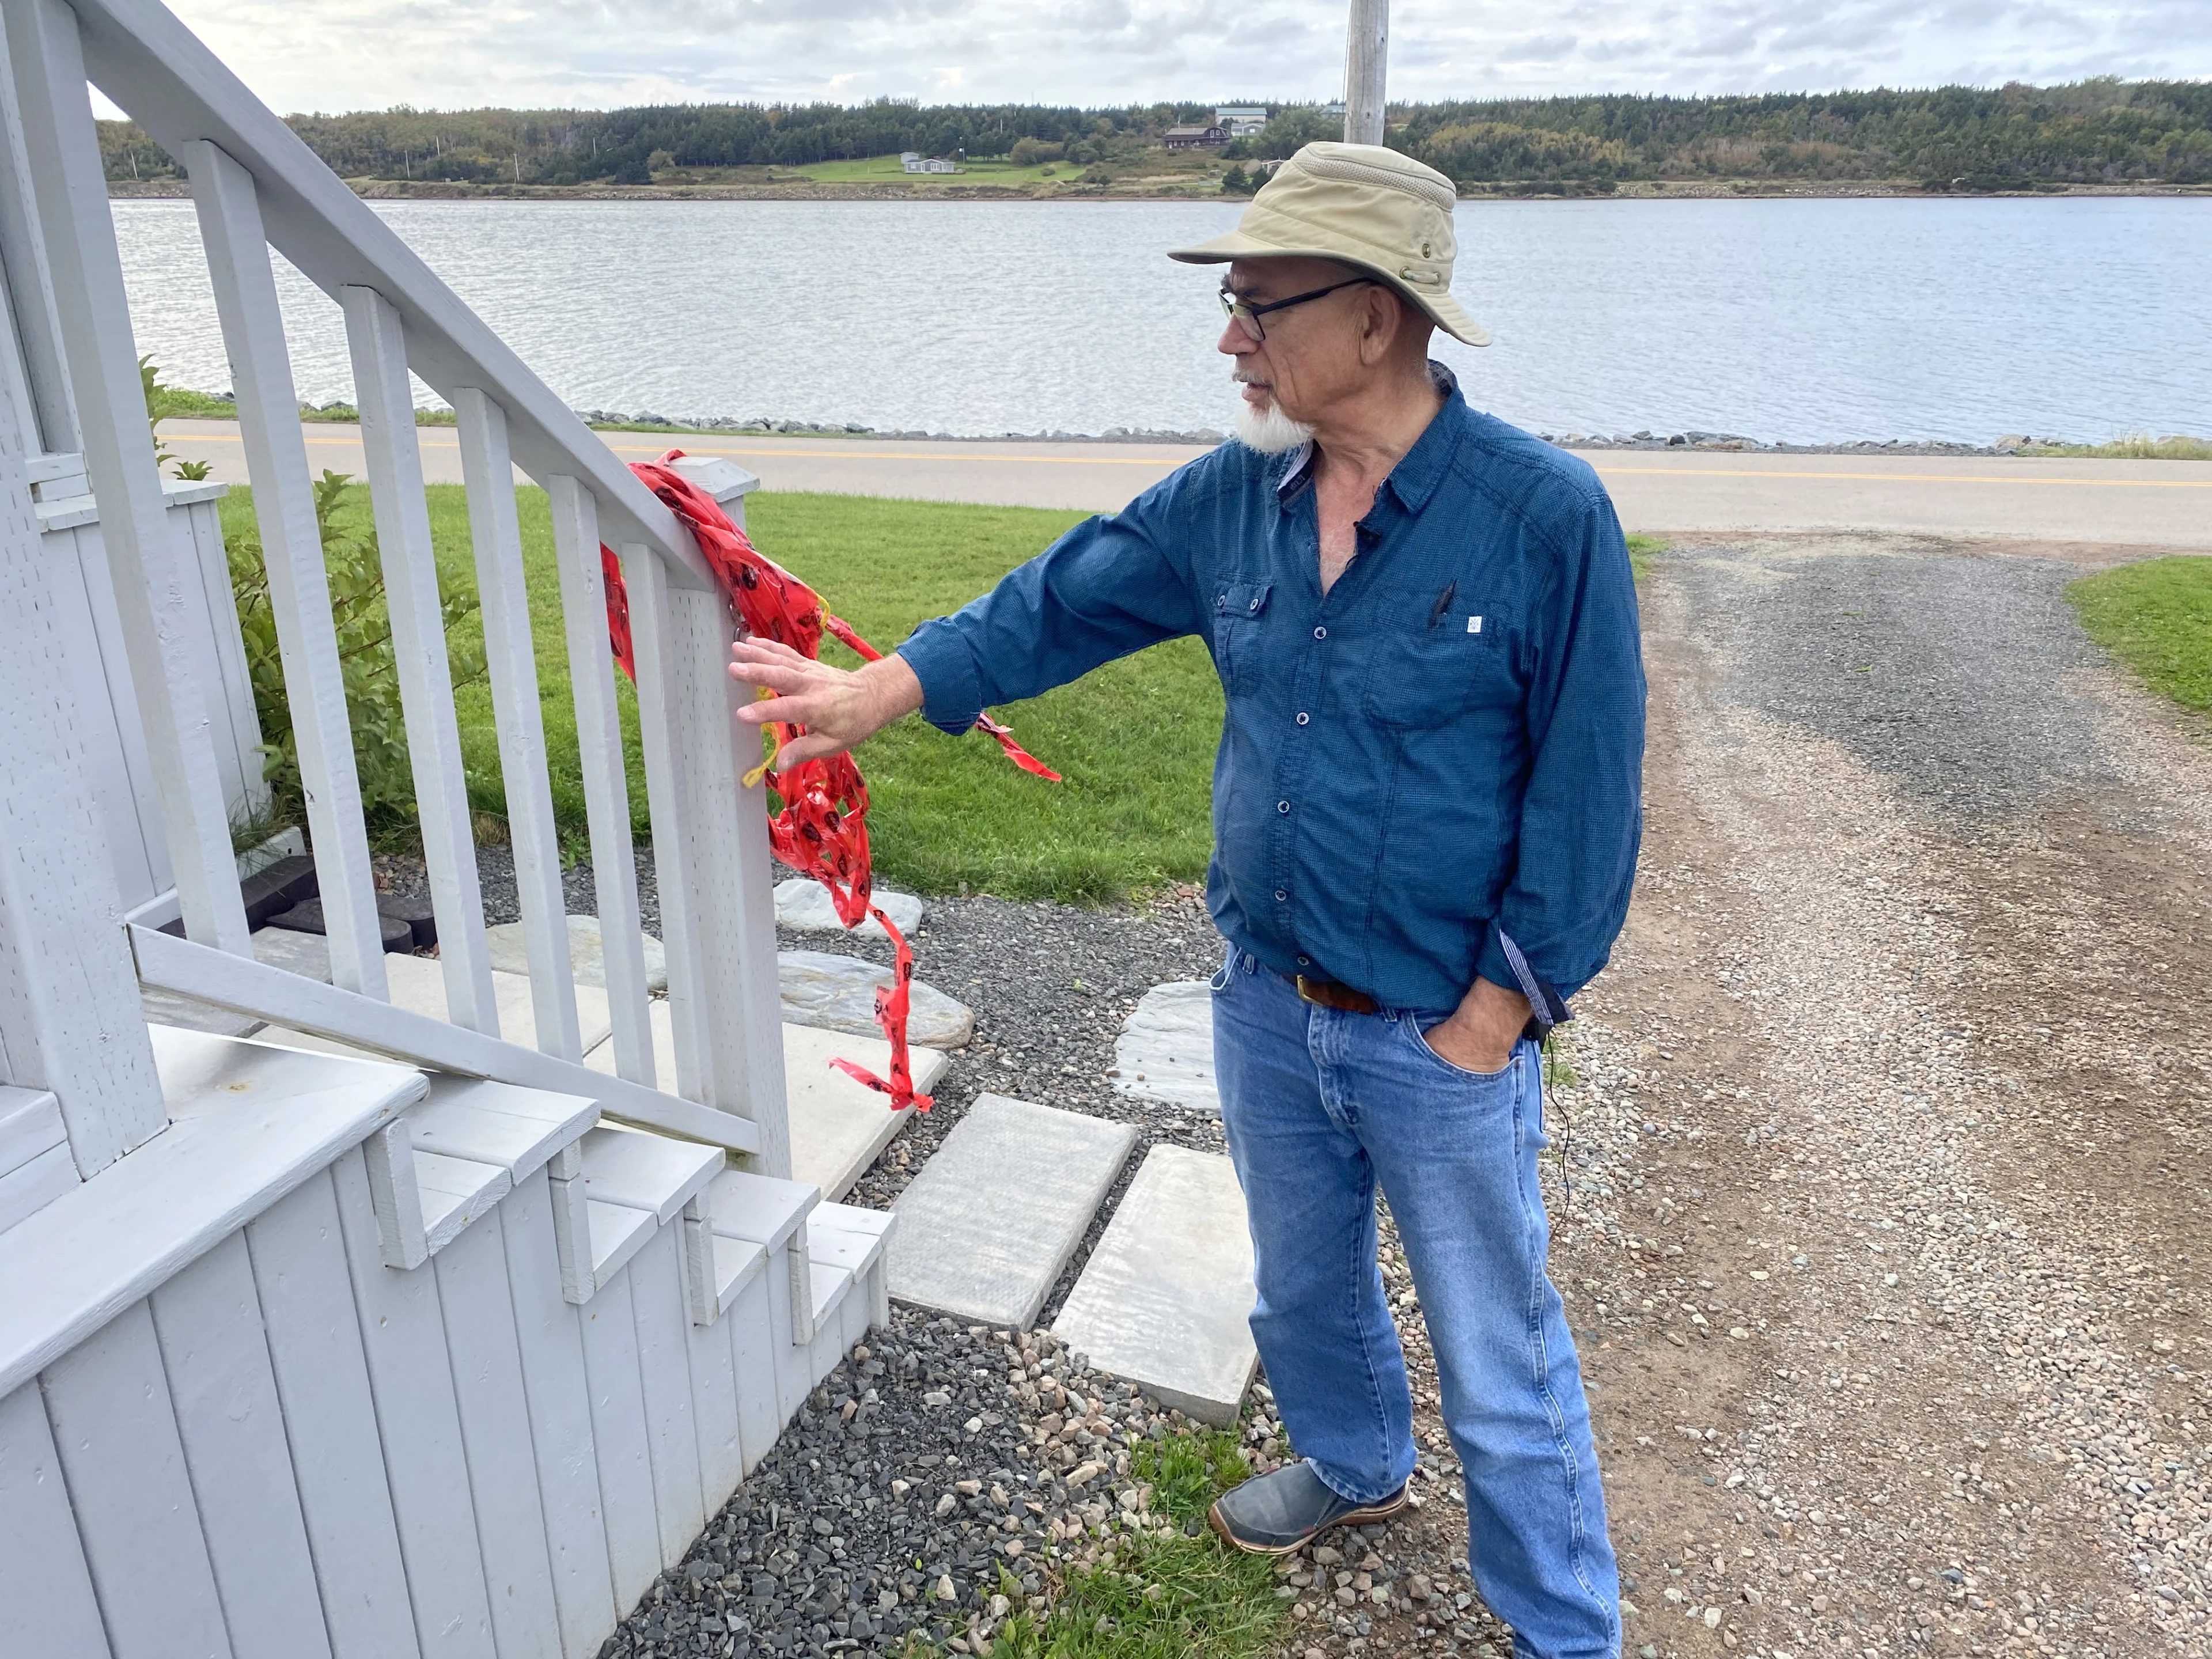 Nathan Coleman: Michel Soucy outside his home in Cheticamp, Nova Scotia, showing the rope he uses to get to his garage during Les Suetes wind events.